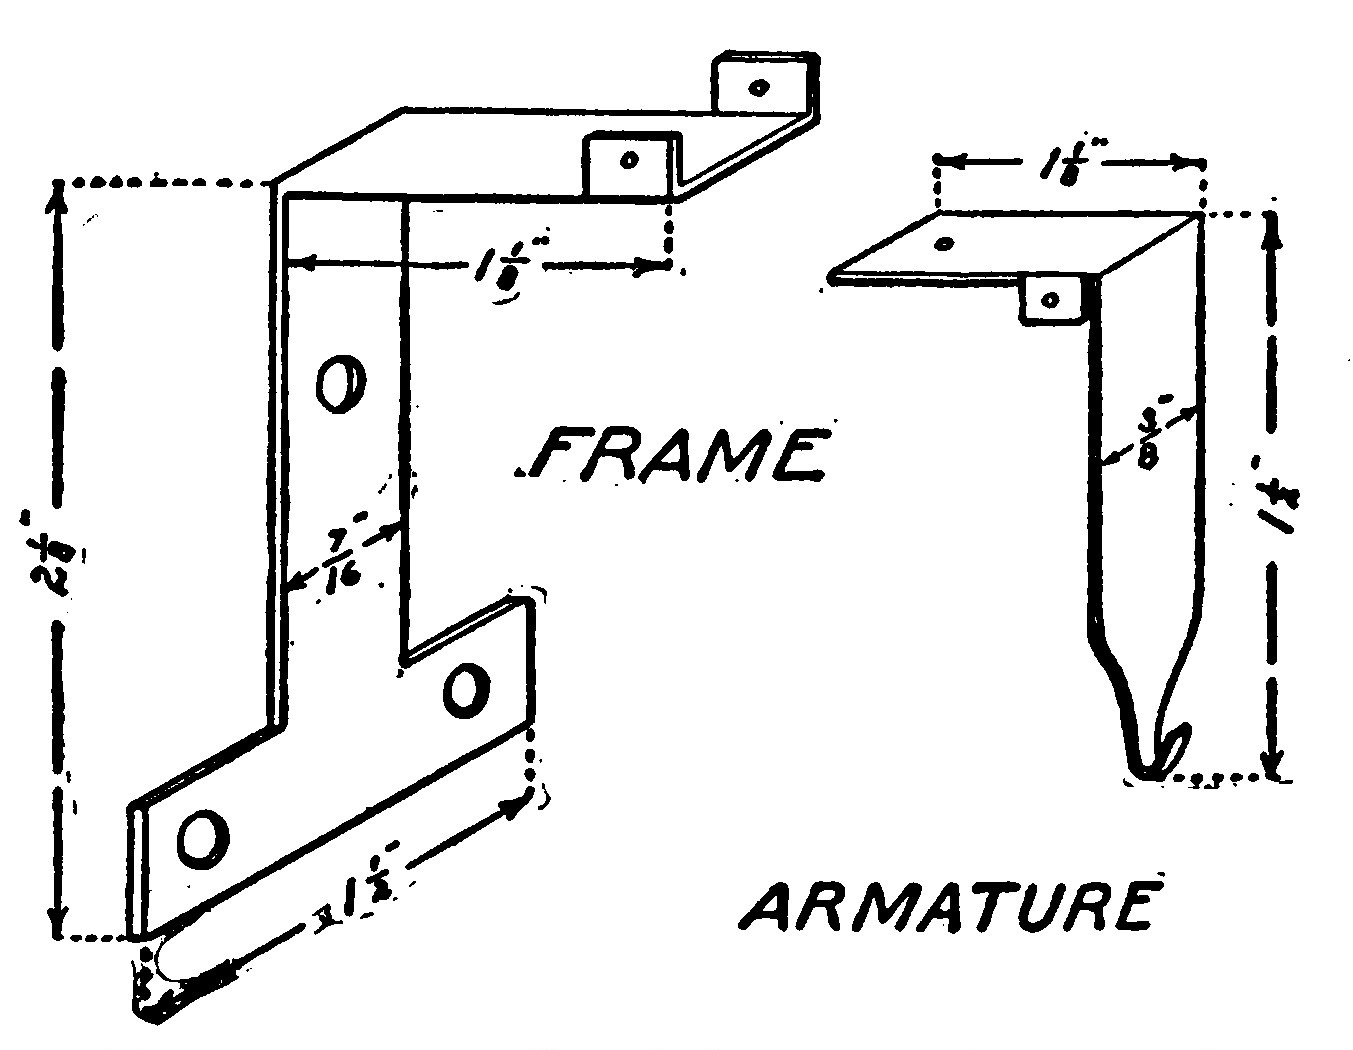 Fig 129.—Details of the Drop-Frame and Armature.